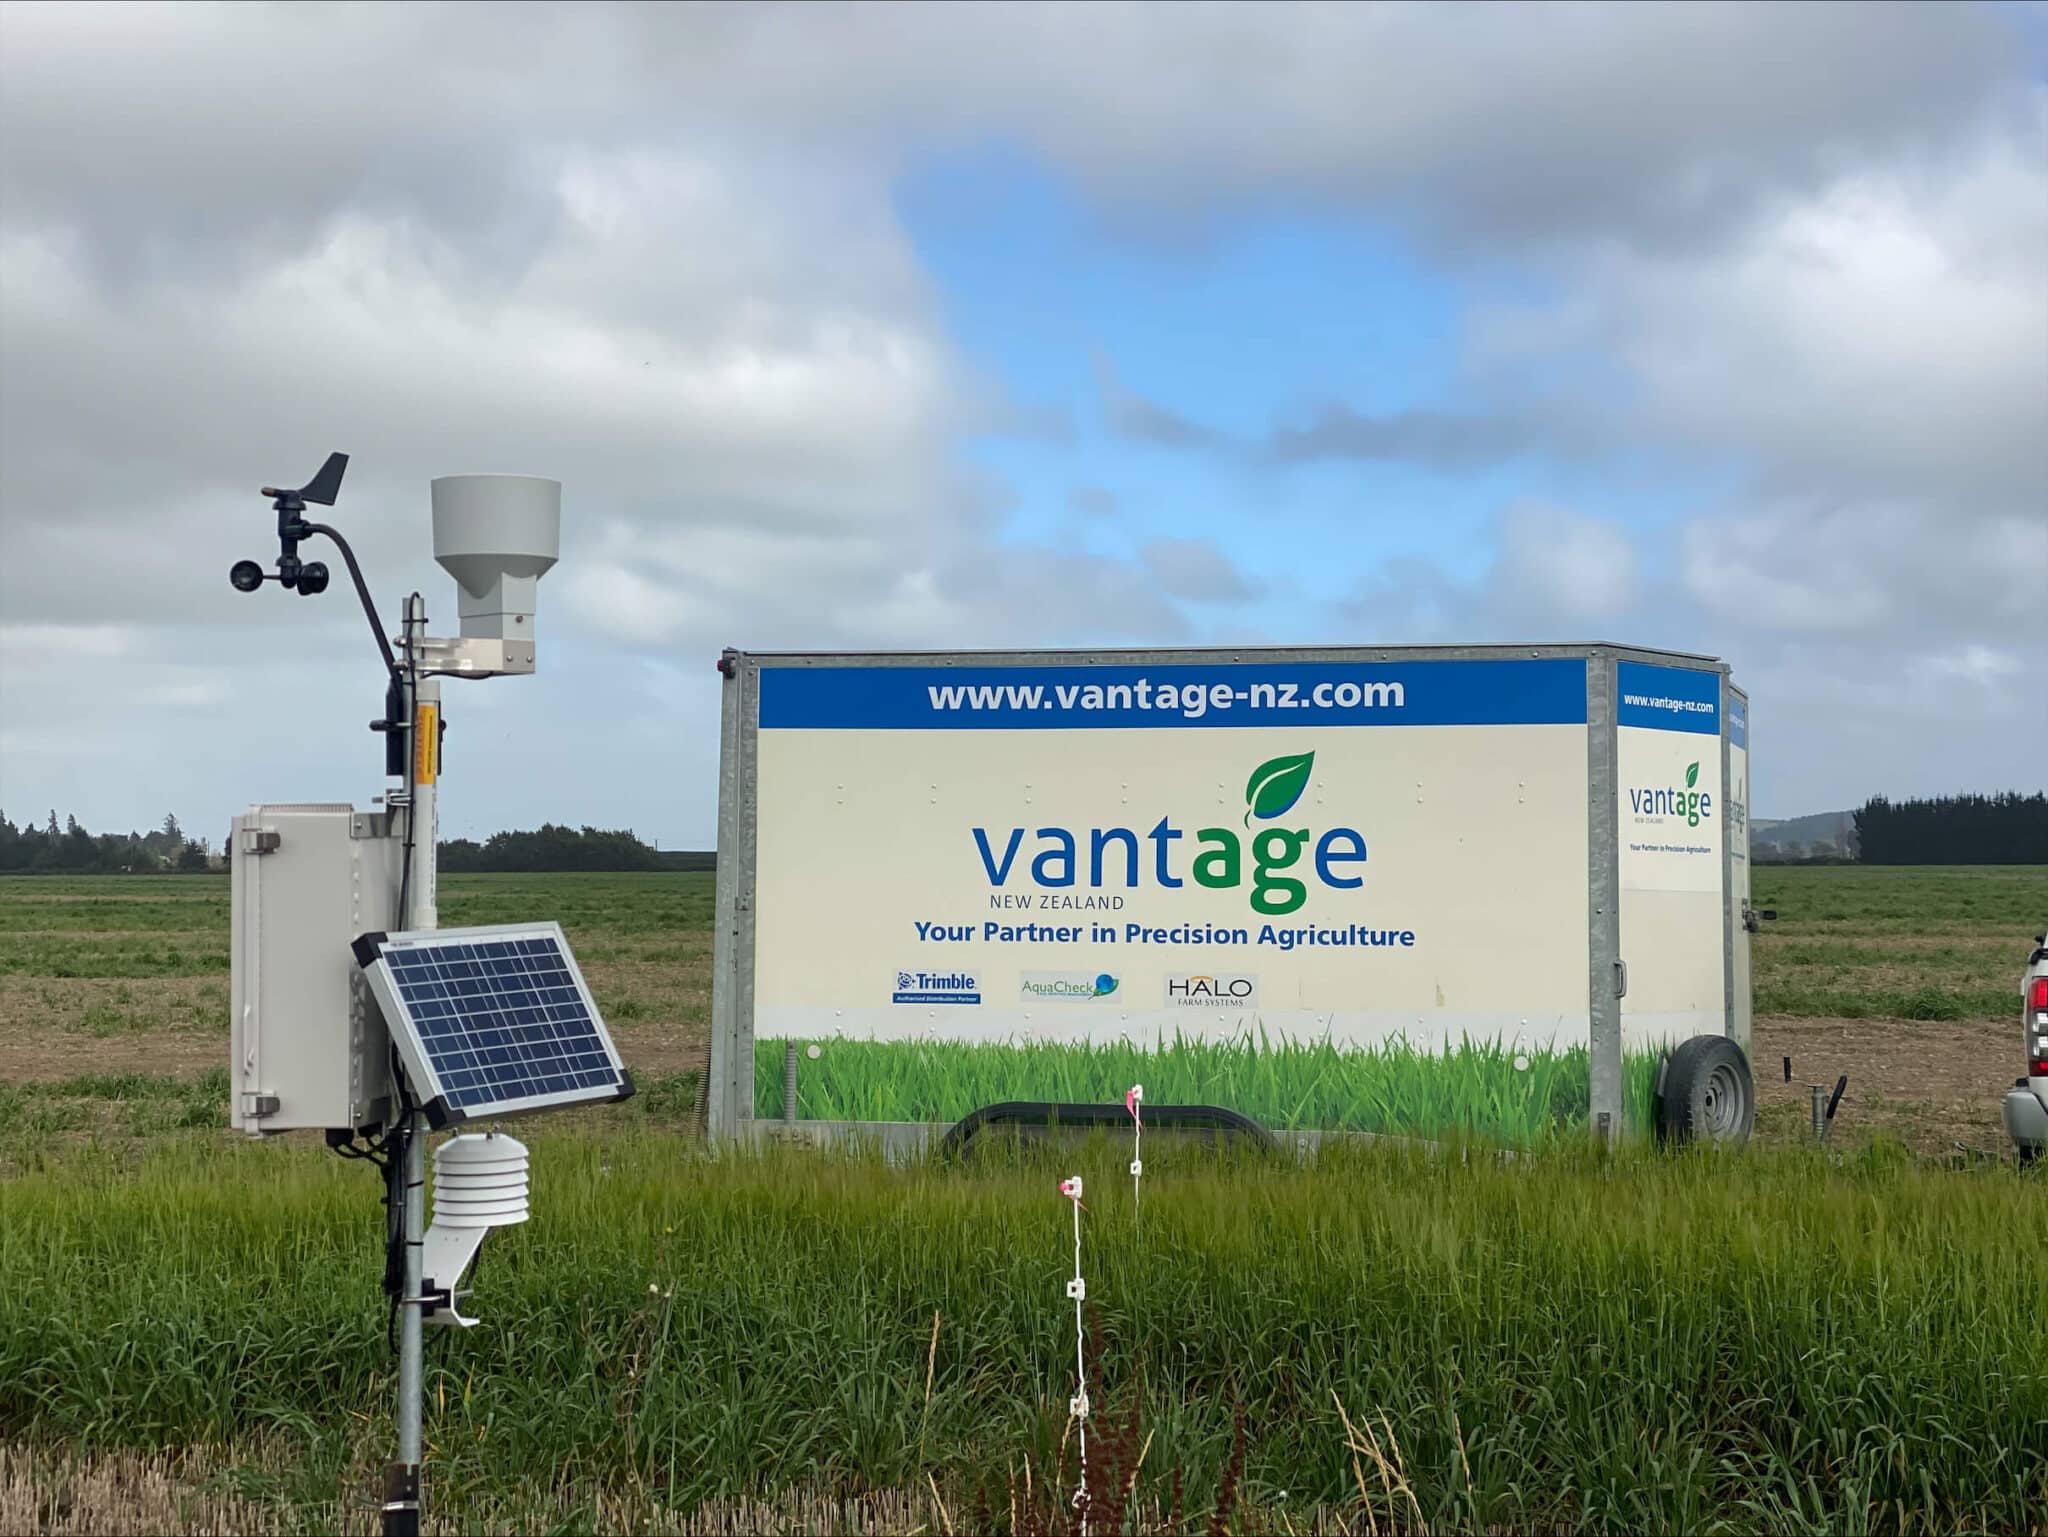 Soil Moisture Meter and Vantage Brand Trailor in the Field